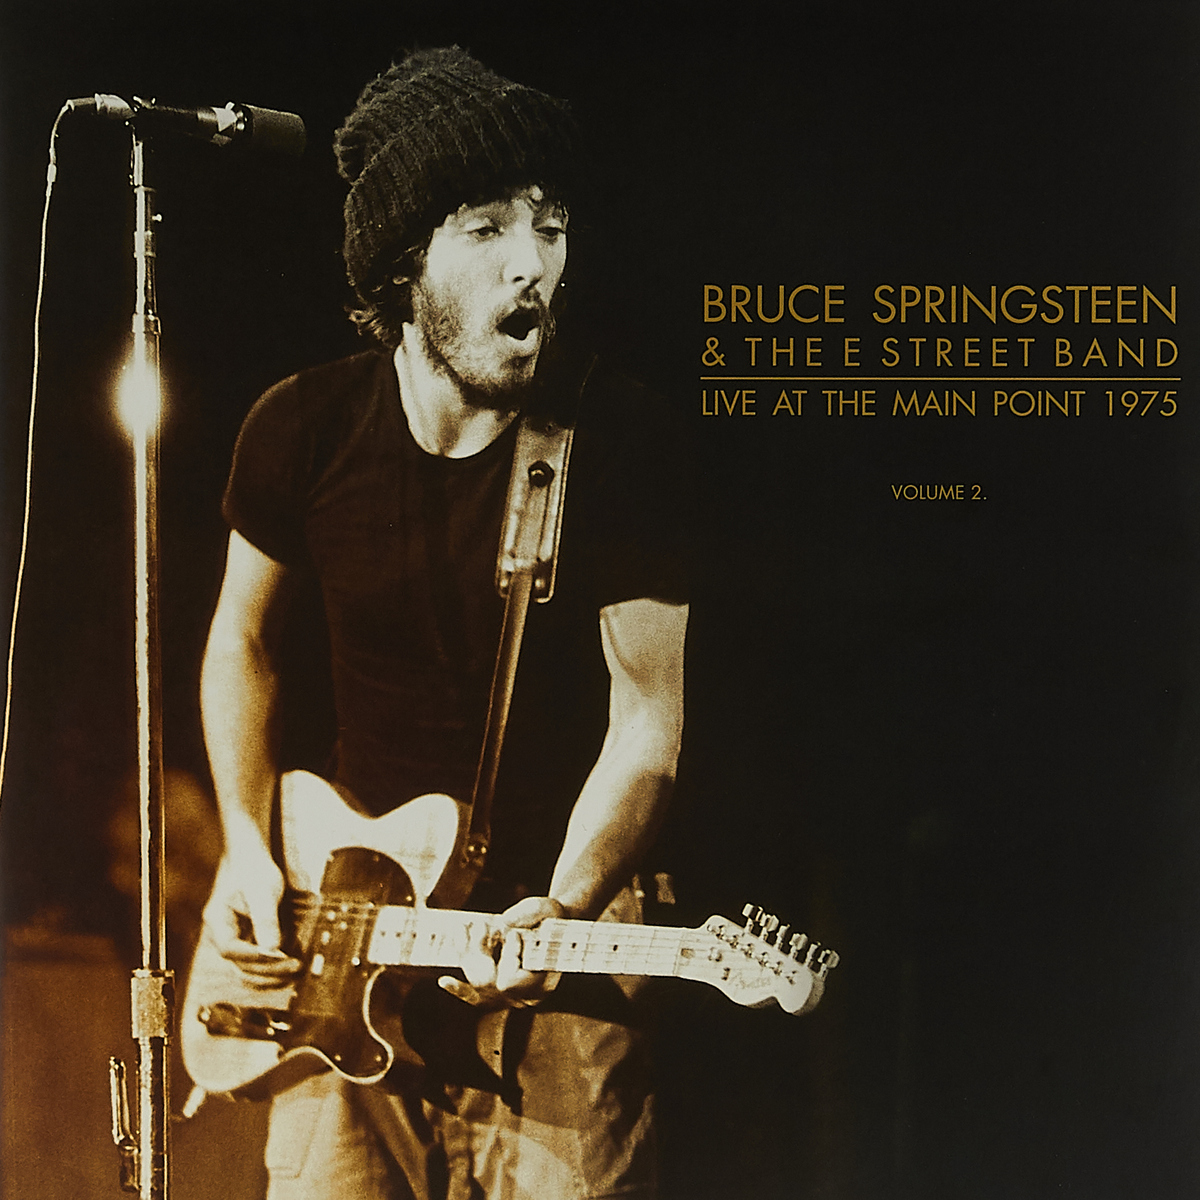 Bruce Springsteen & The E Street Band. Live At The Main Point 1975 Volume 2 (2 LP)